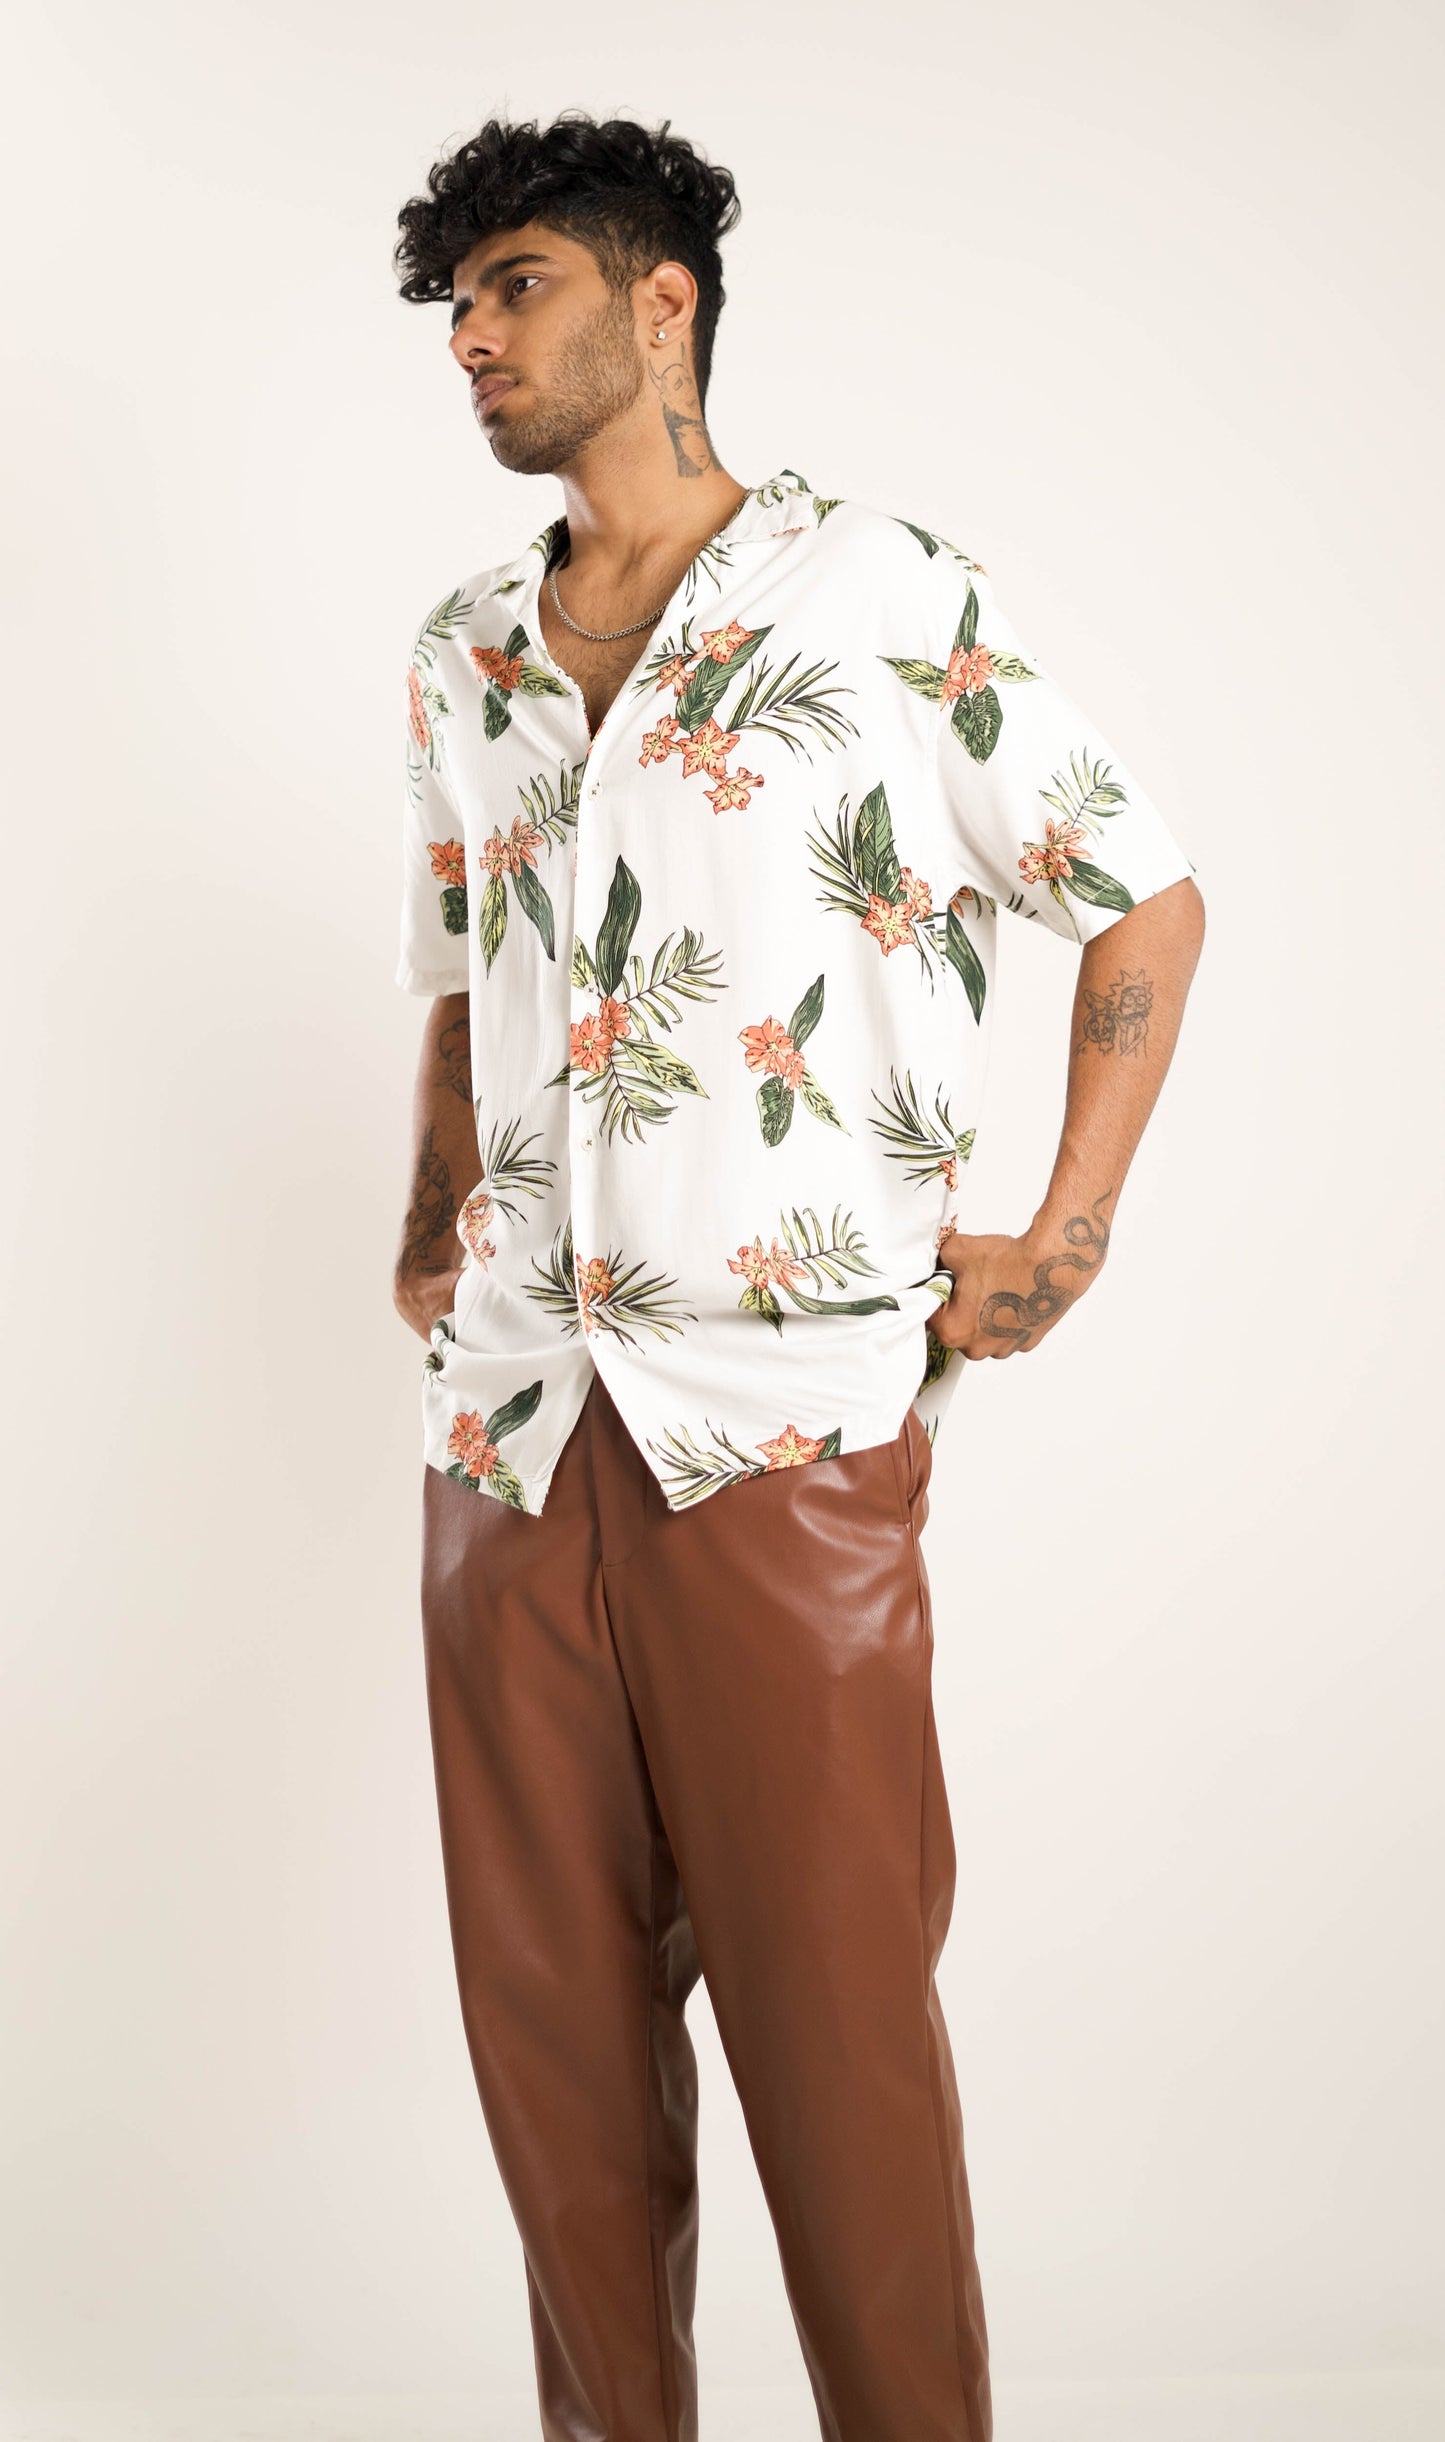 Men's Relaxed Fit Short Sleeves Floral Printed White Shirt